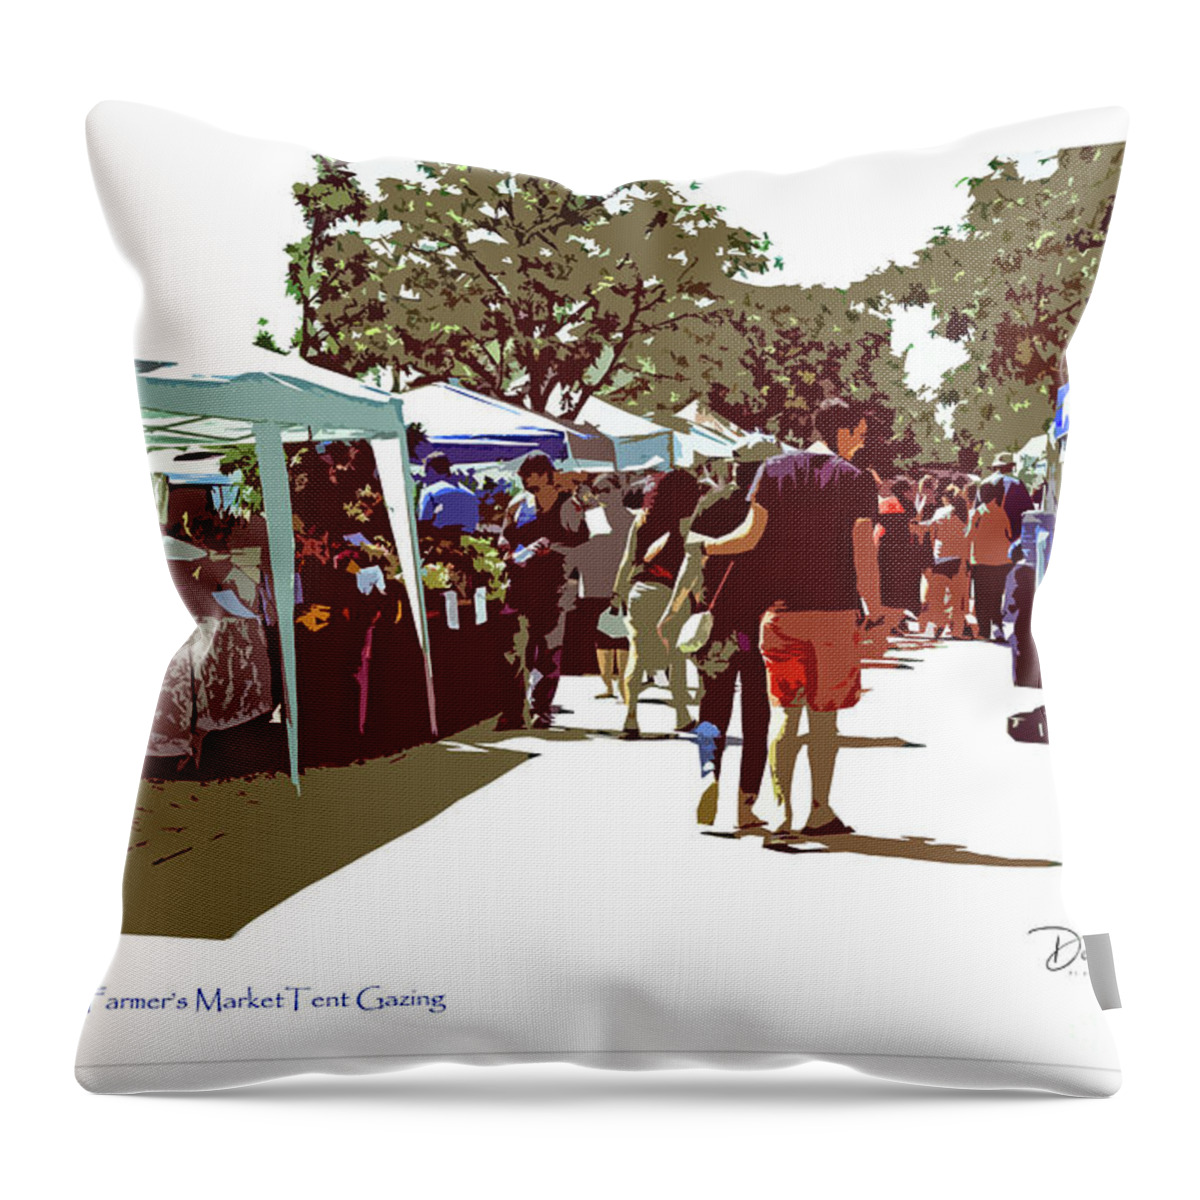  Longmont Throw Pillow featuring the digital art Farmers's Market Tent Gazing by Deb Nakano